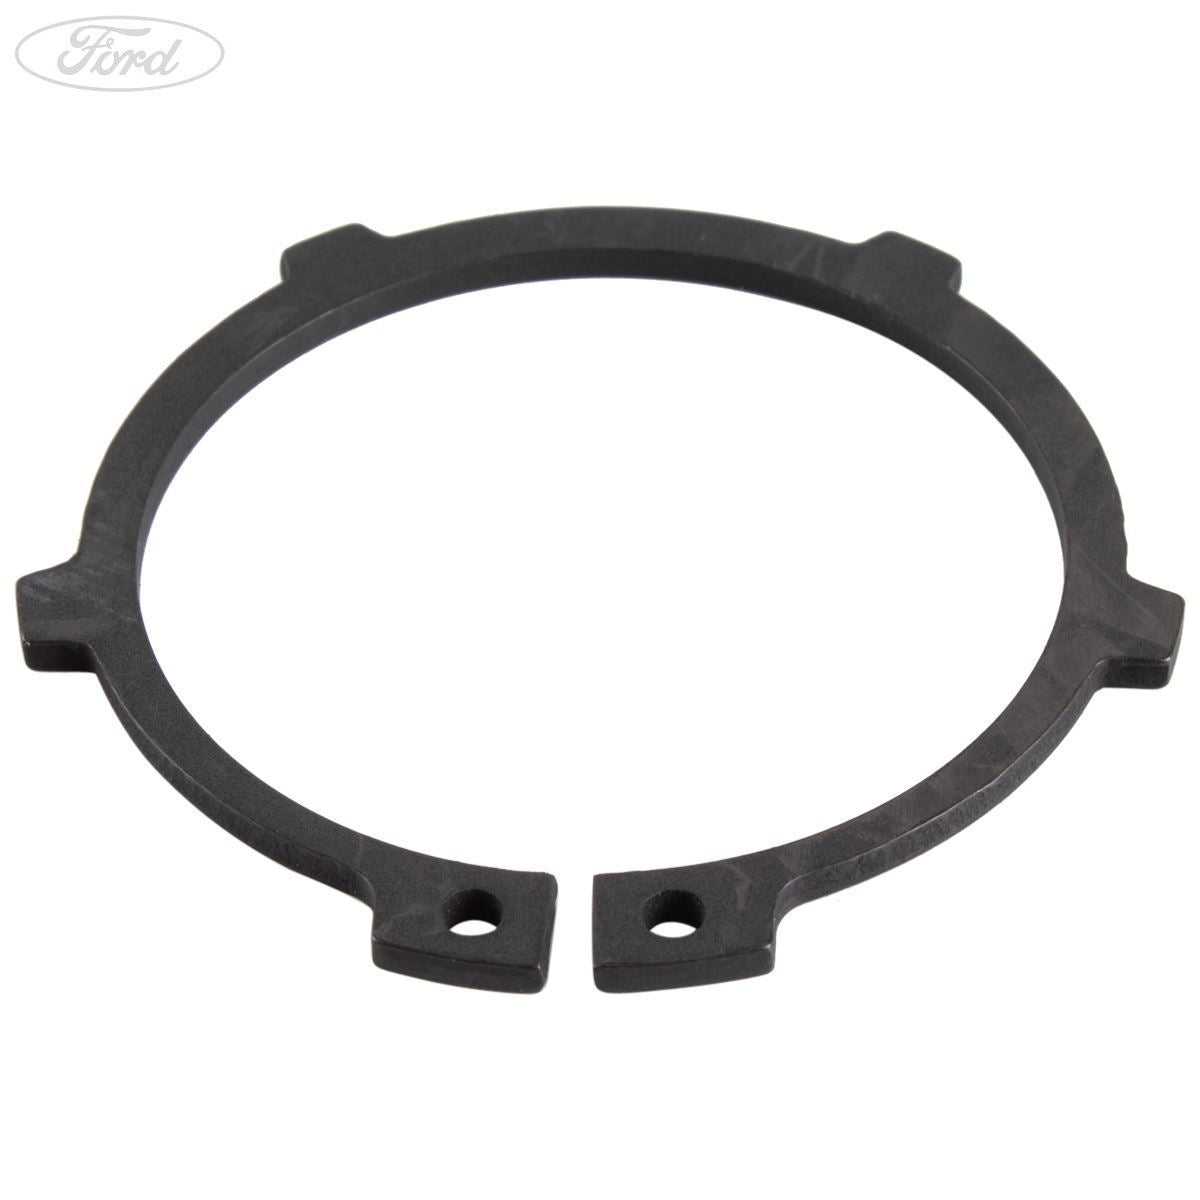 Ford, TRANSIT 6 SPEED GEARBOX SNAP RING 01/2014